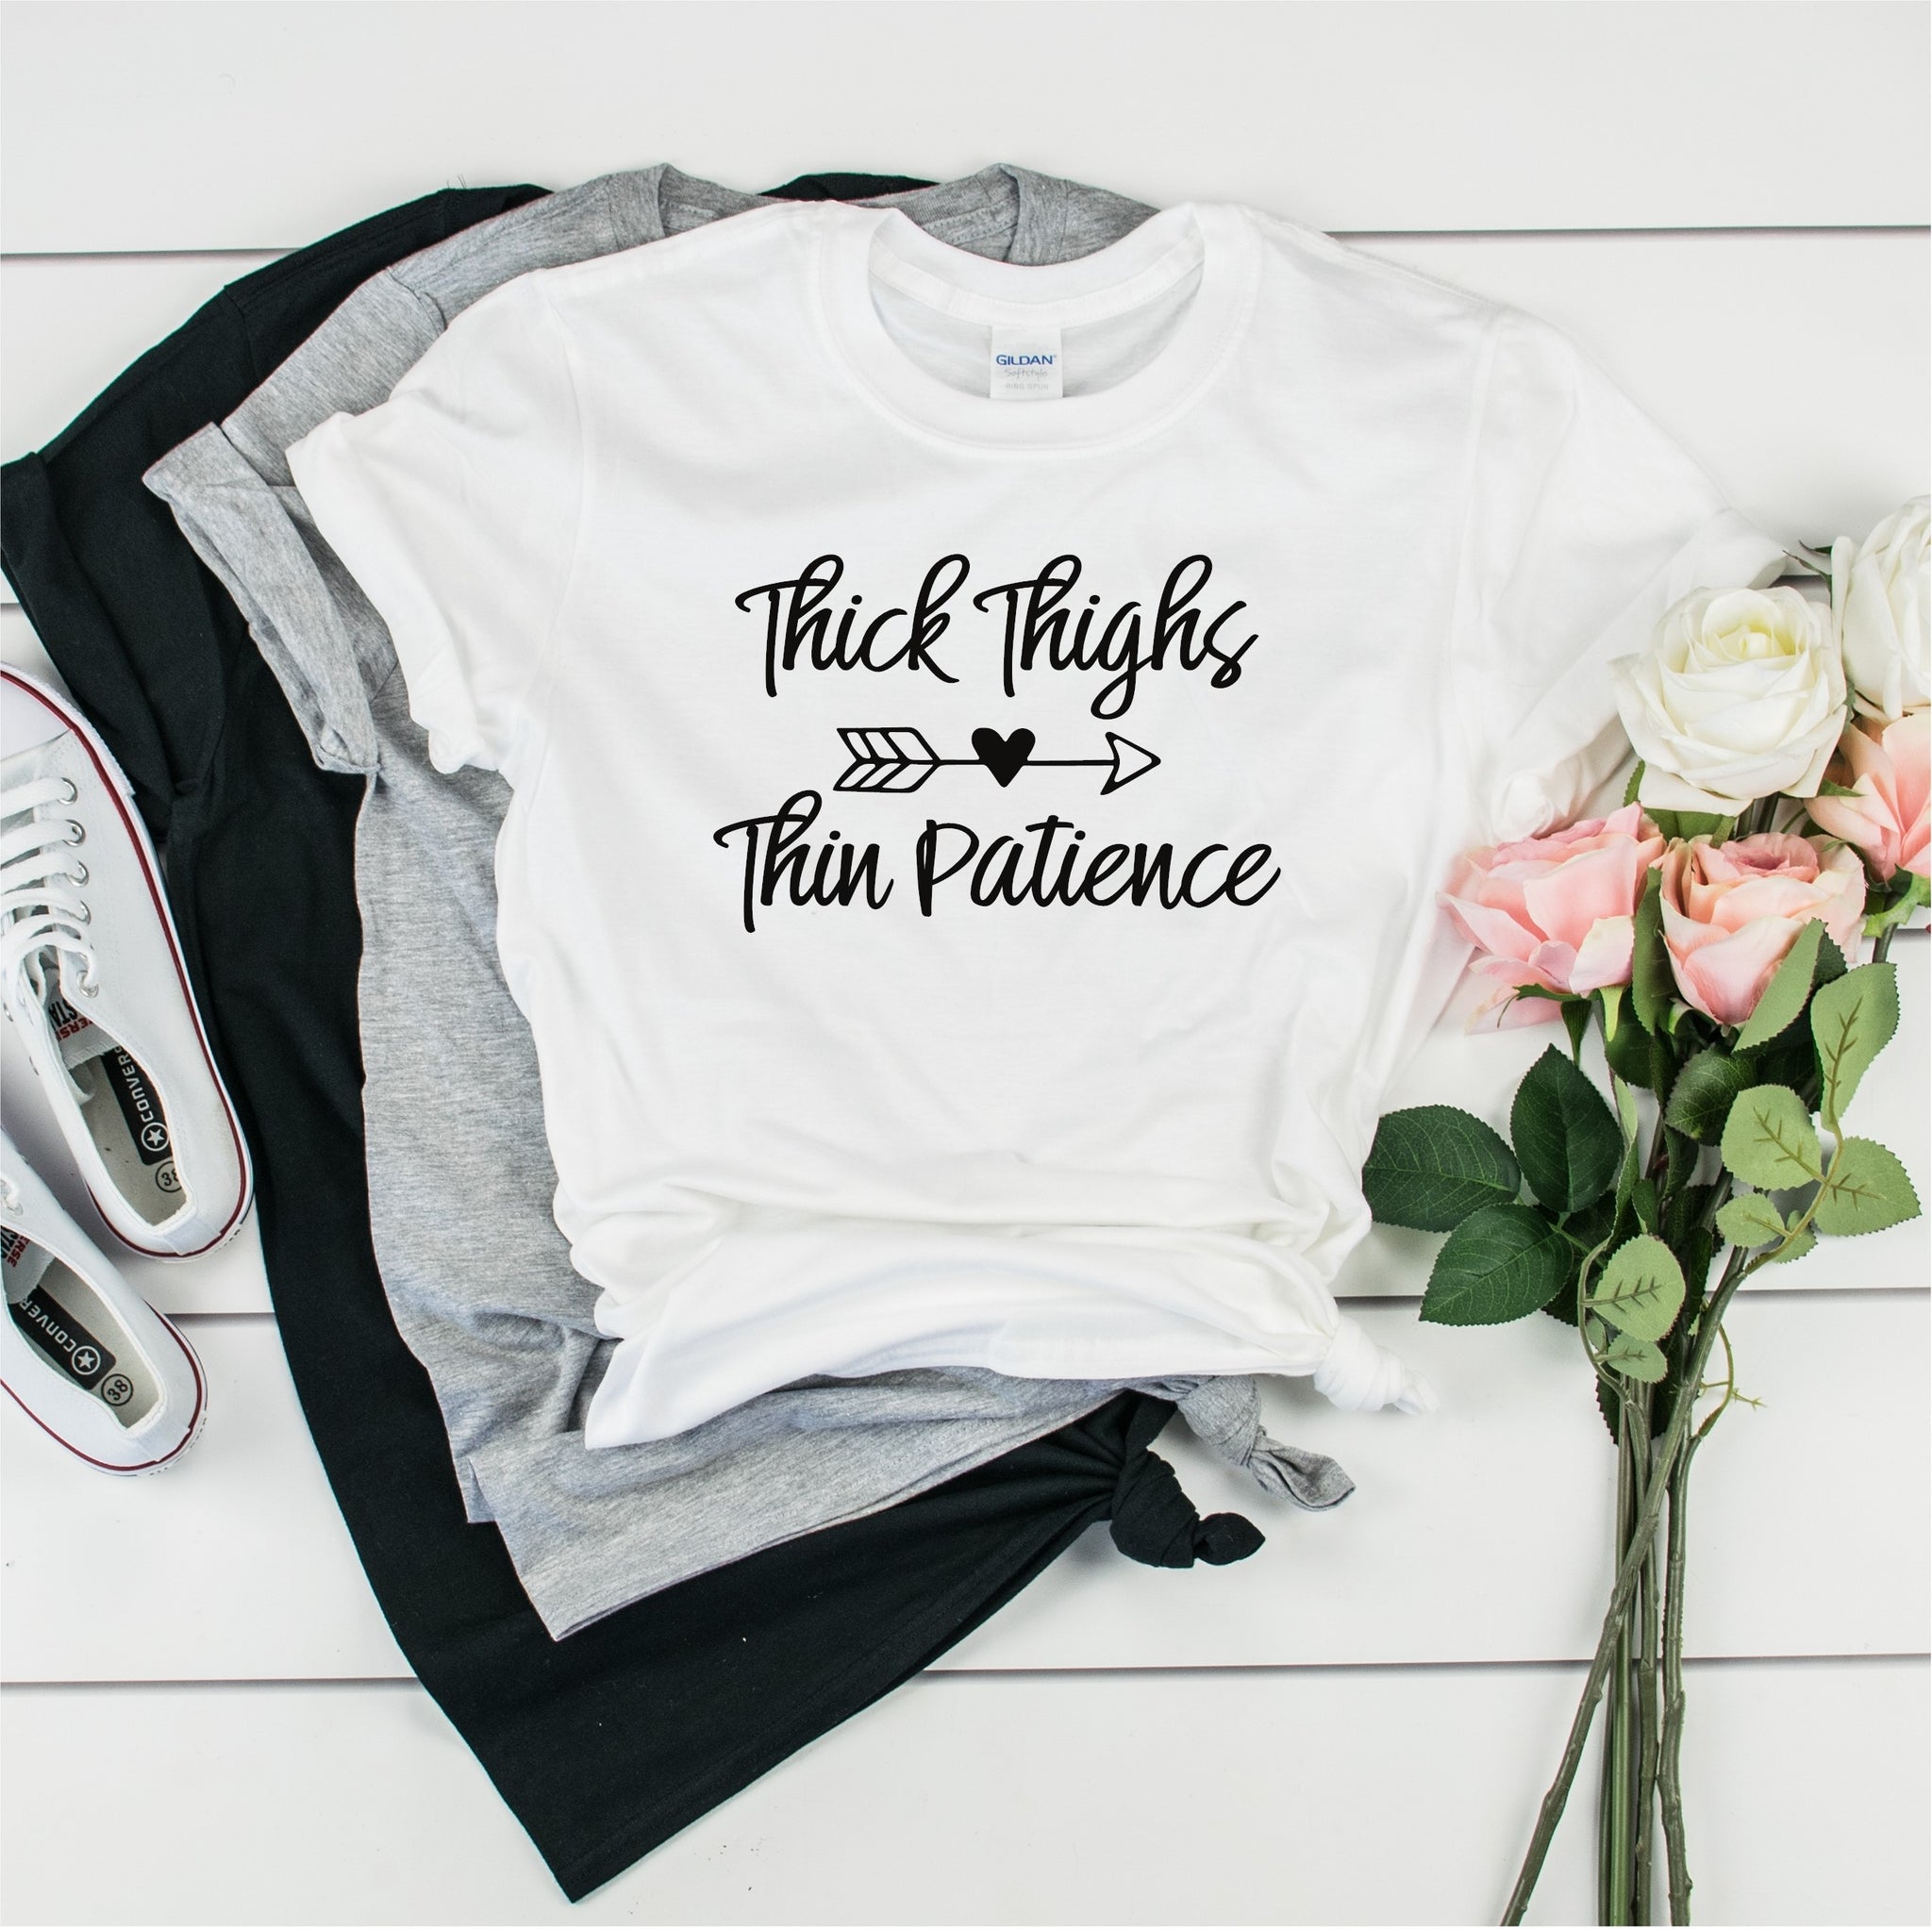 Thick Thighs Thin Patience - Ultra Cotton Short Sleeve T-Shirt